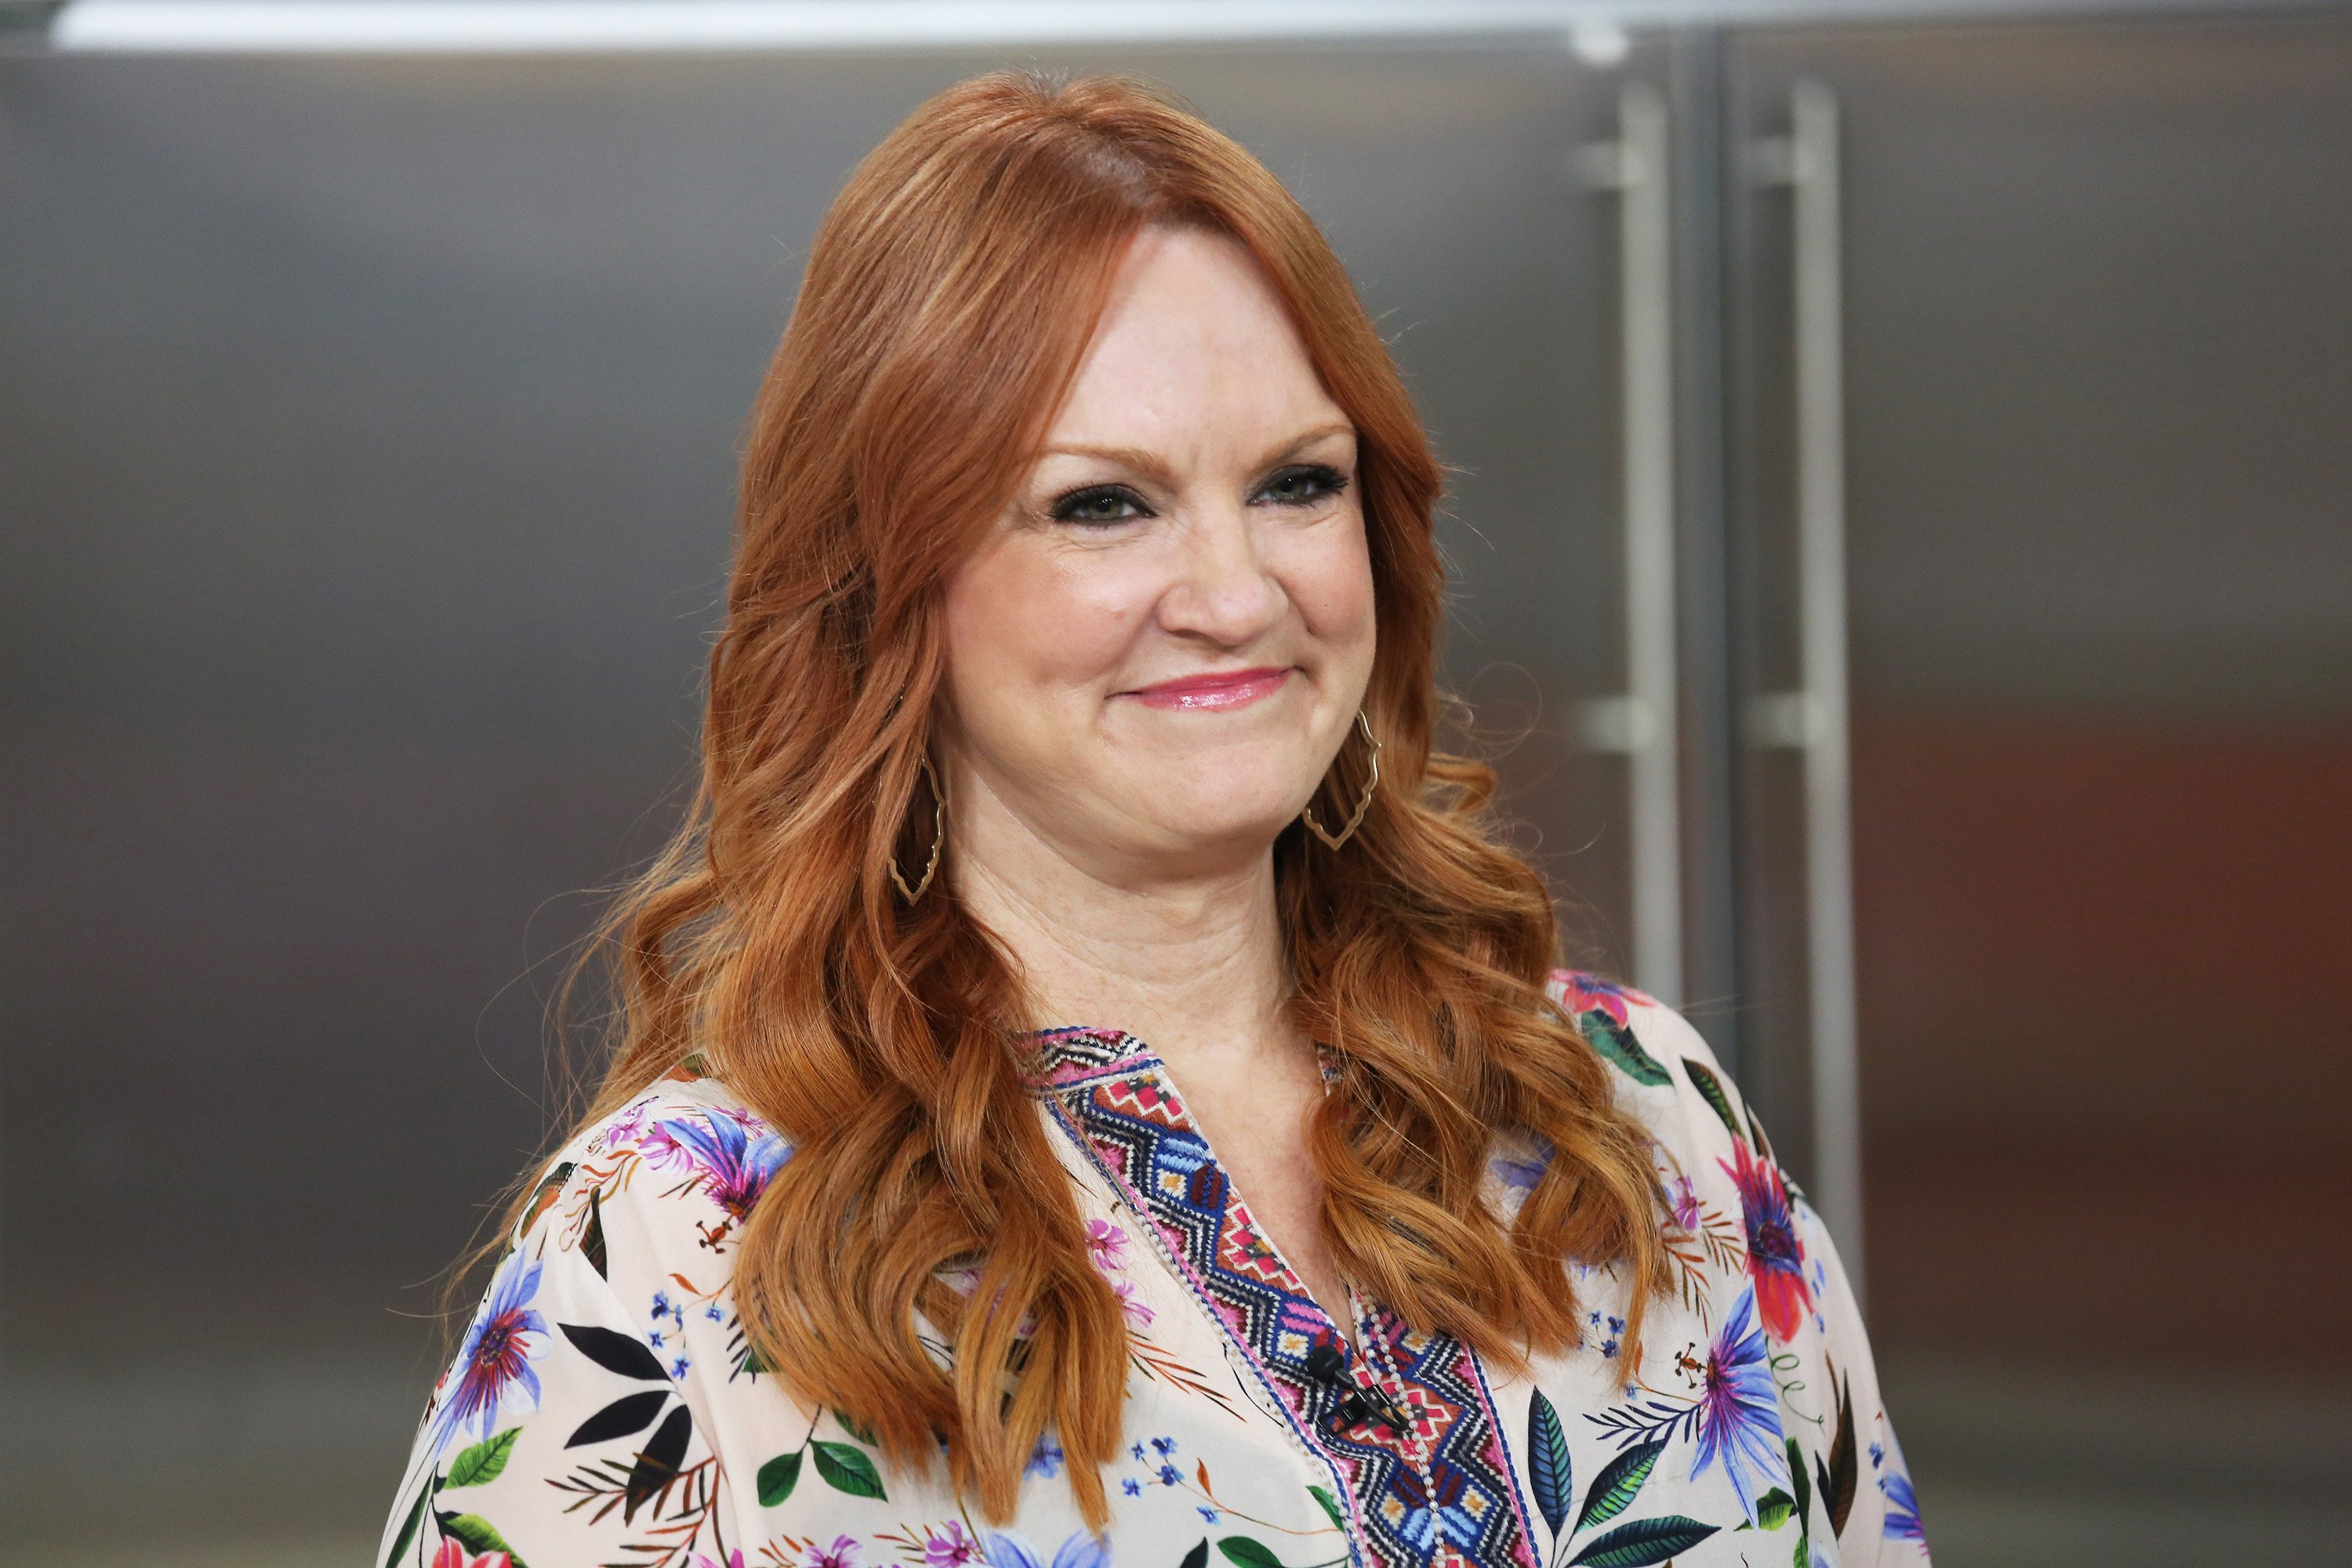 Ree Drummond on the Today show | Tyler Essary/NBC/NBCU Photo Bank via Getty Images